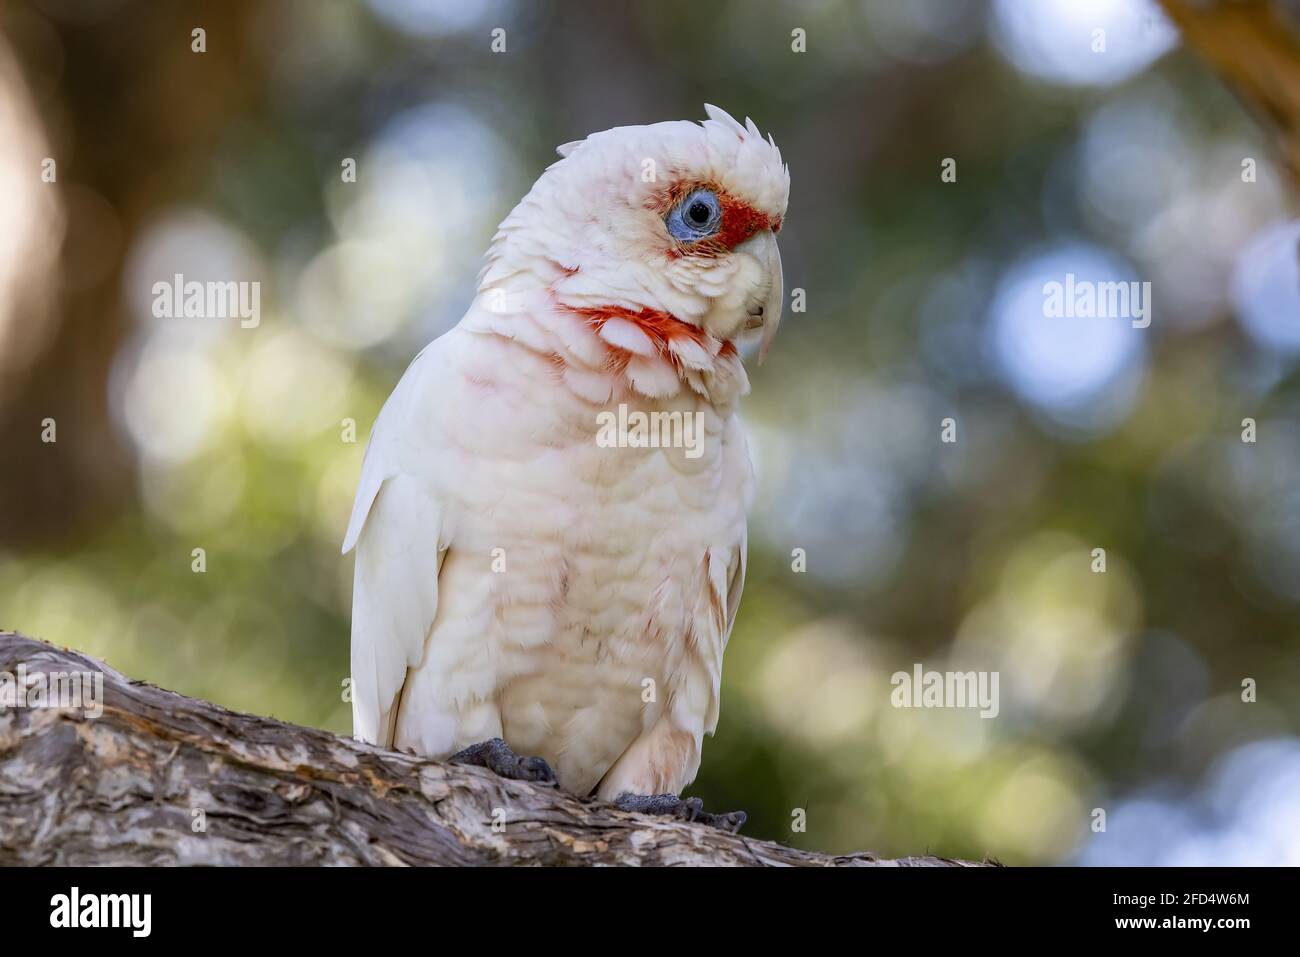 Long-billed Corella perched on tree branch Stock Photo